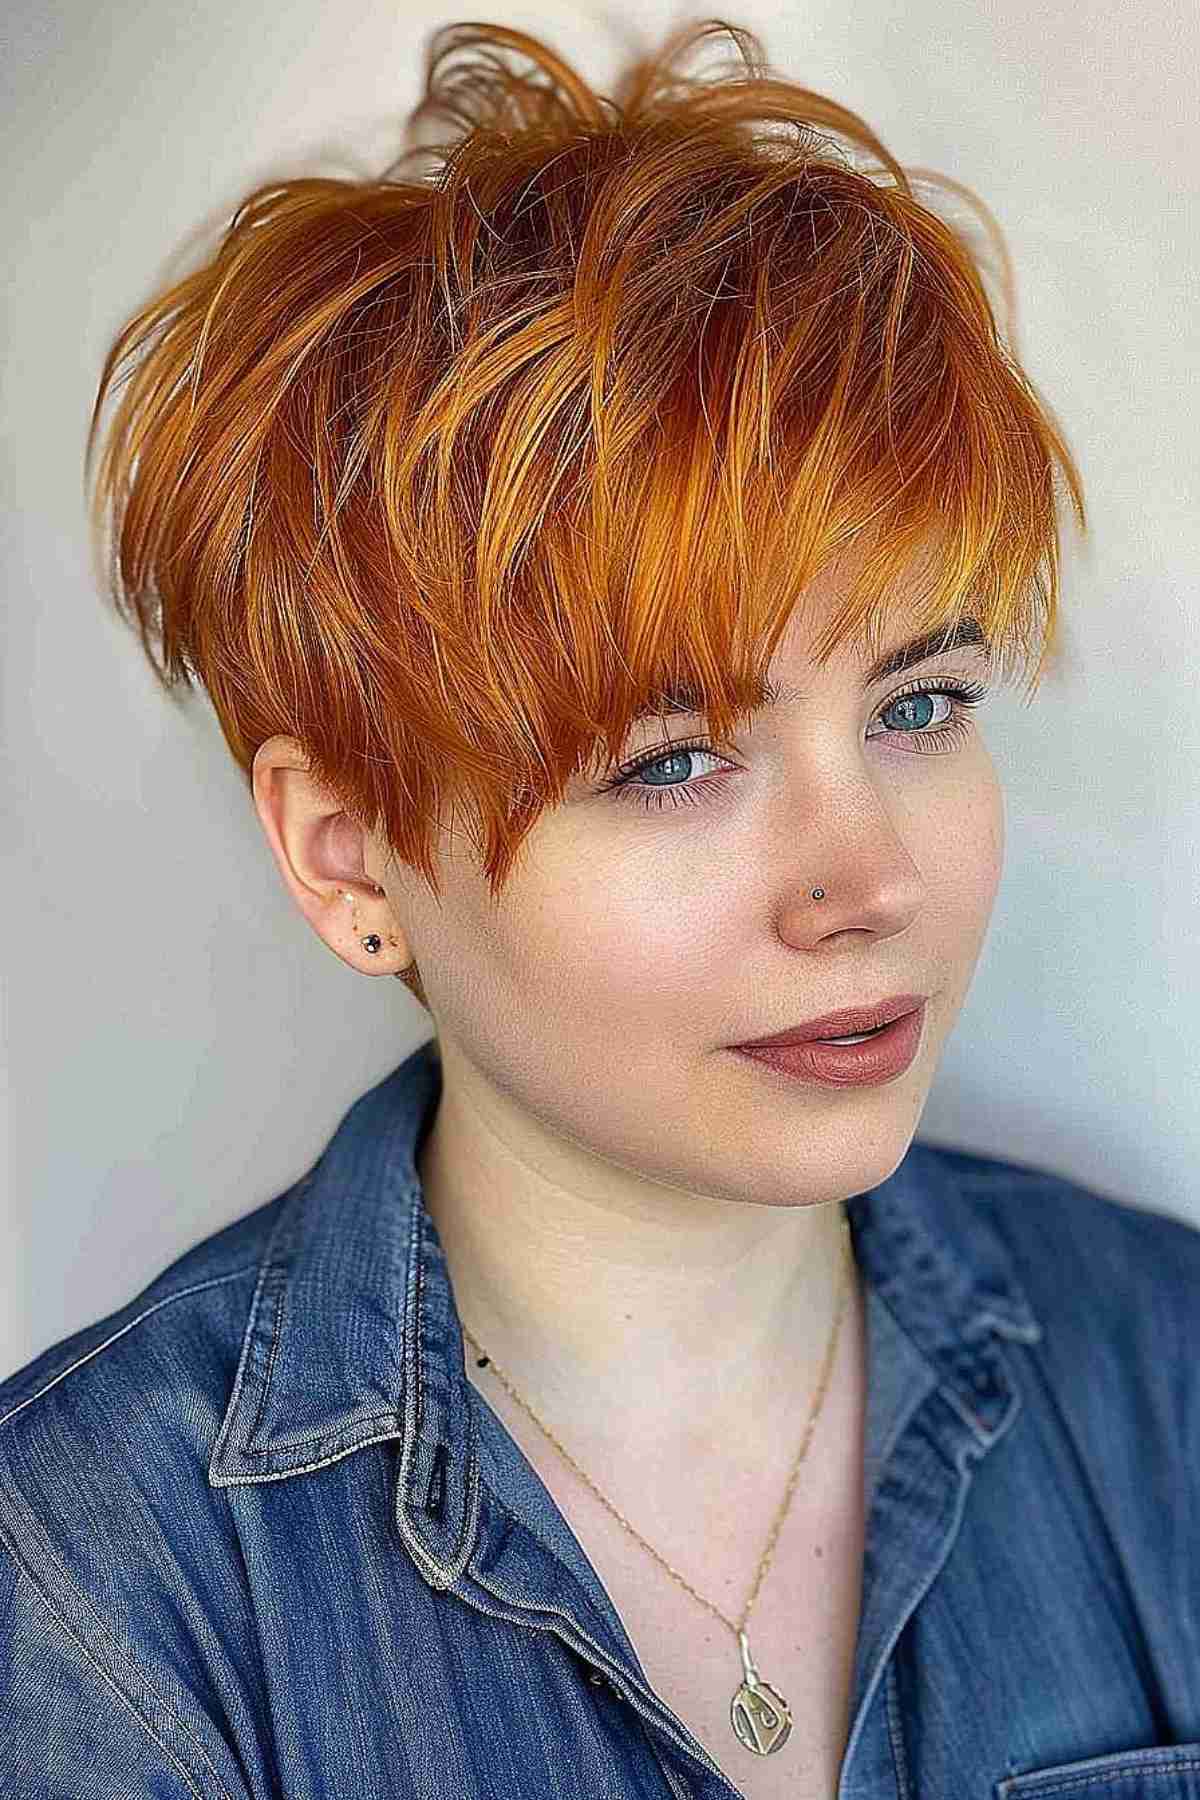 Copper Short Choppy Pixie Cut with Side-Swept Bangs